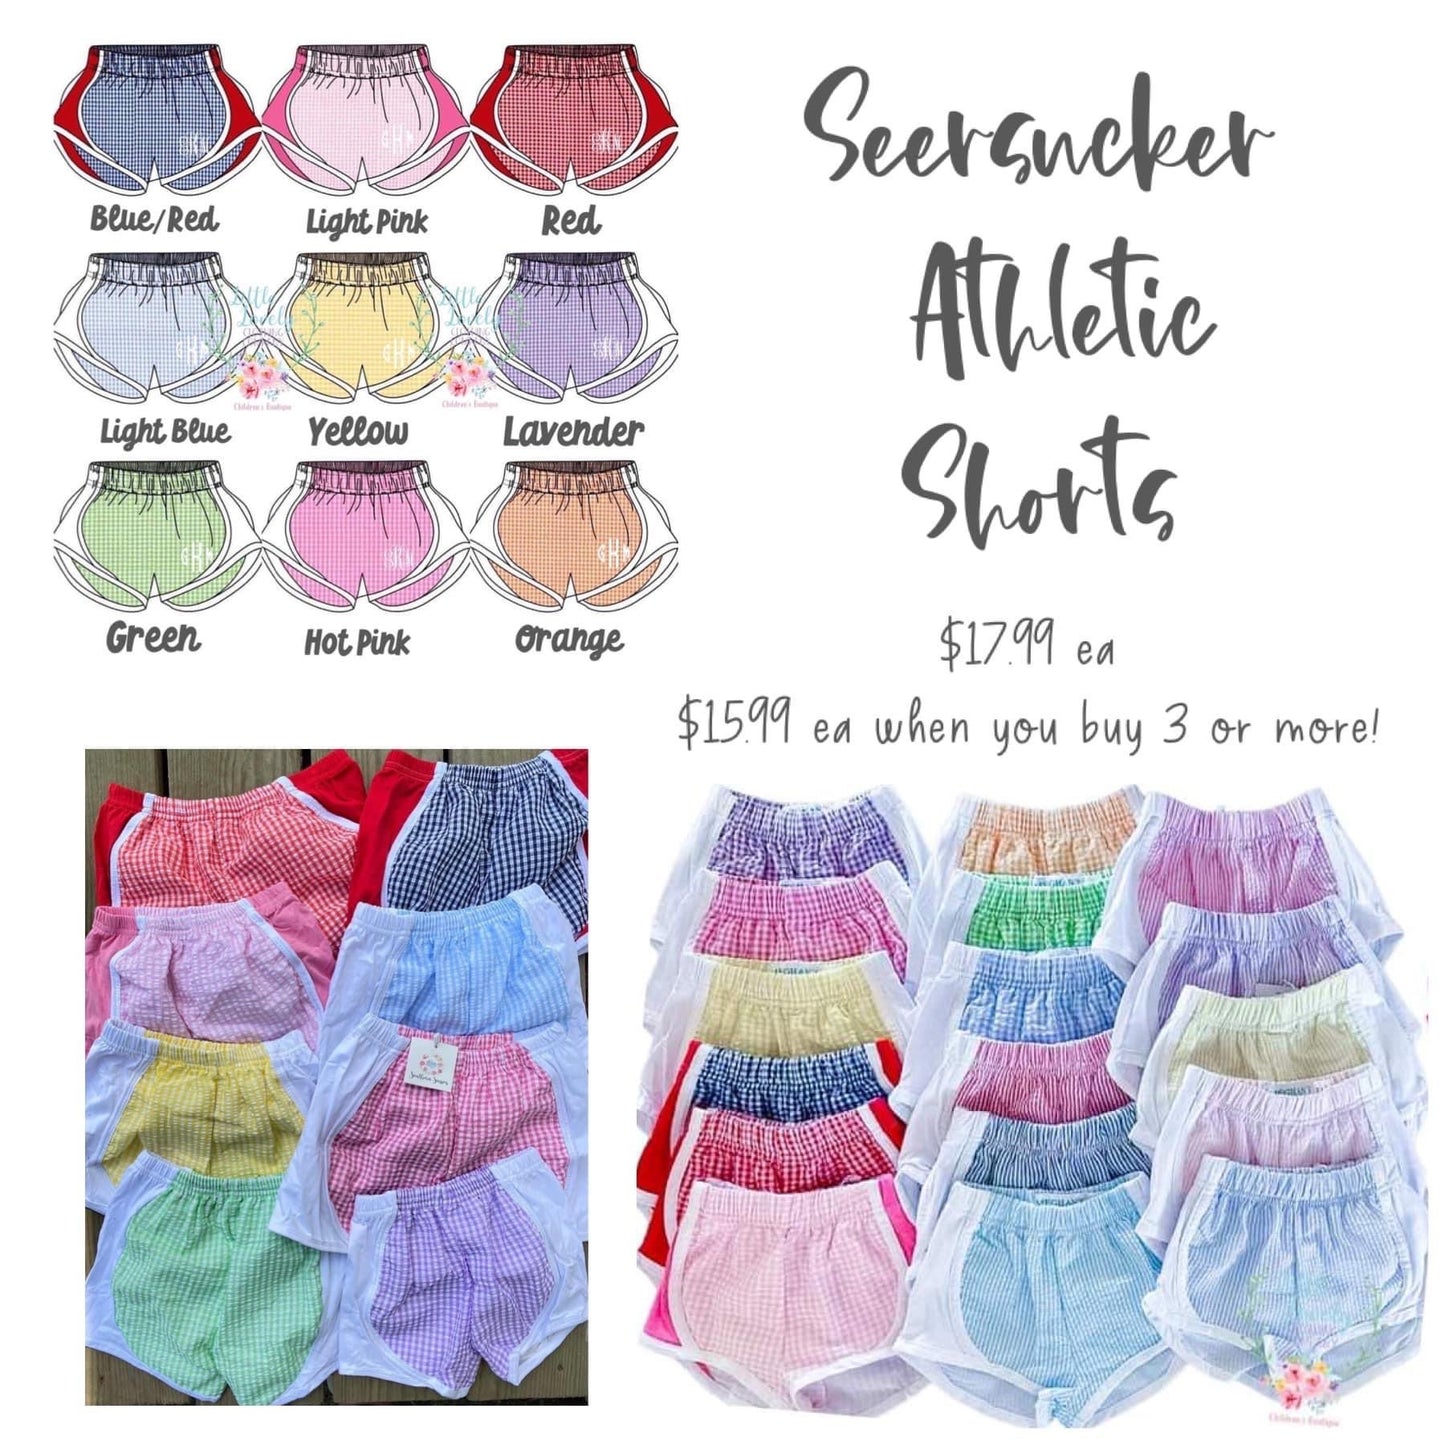 Seersucker Athletic Shorts ETA: April/May to LLCCO then to Customers